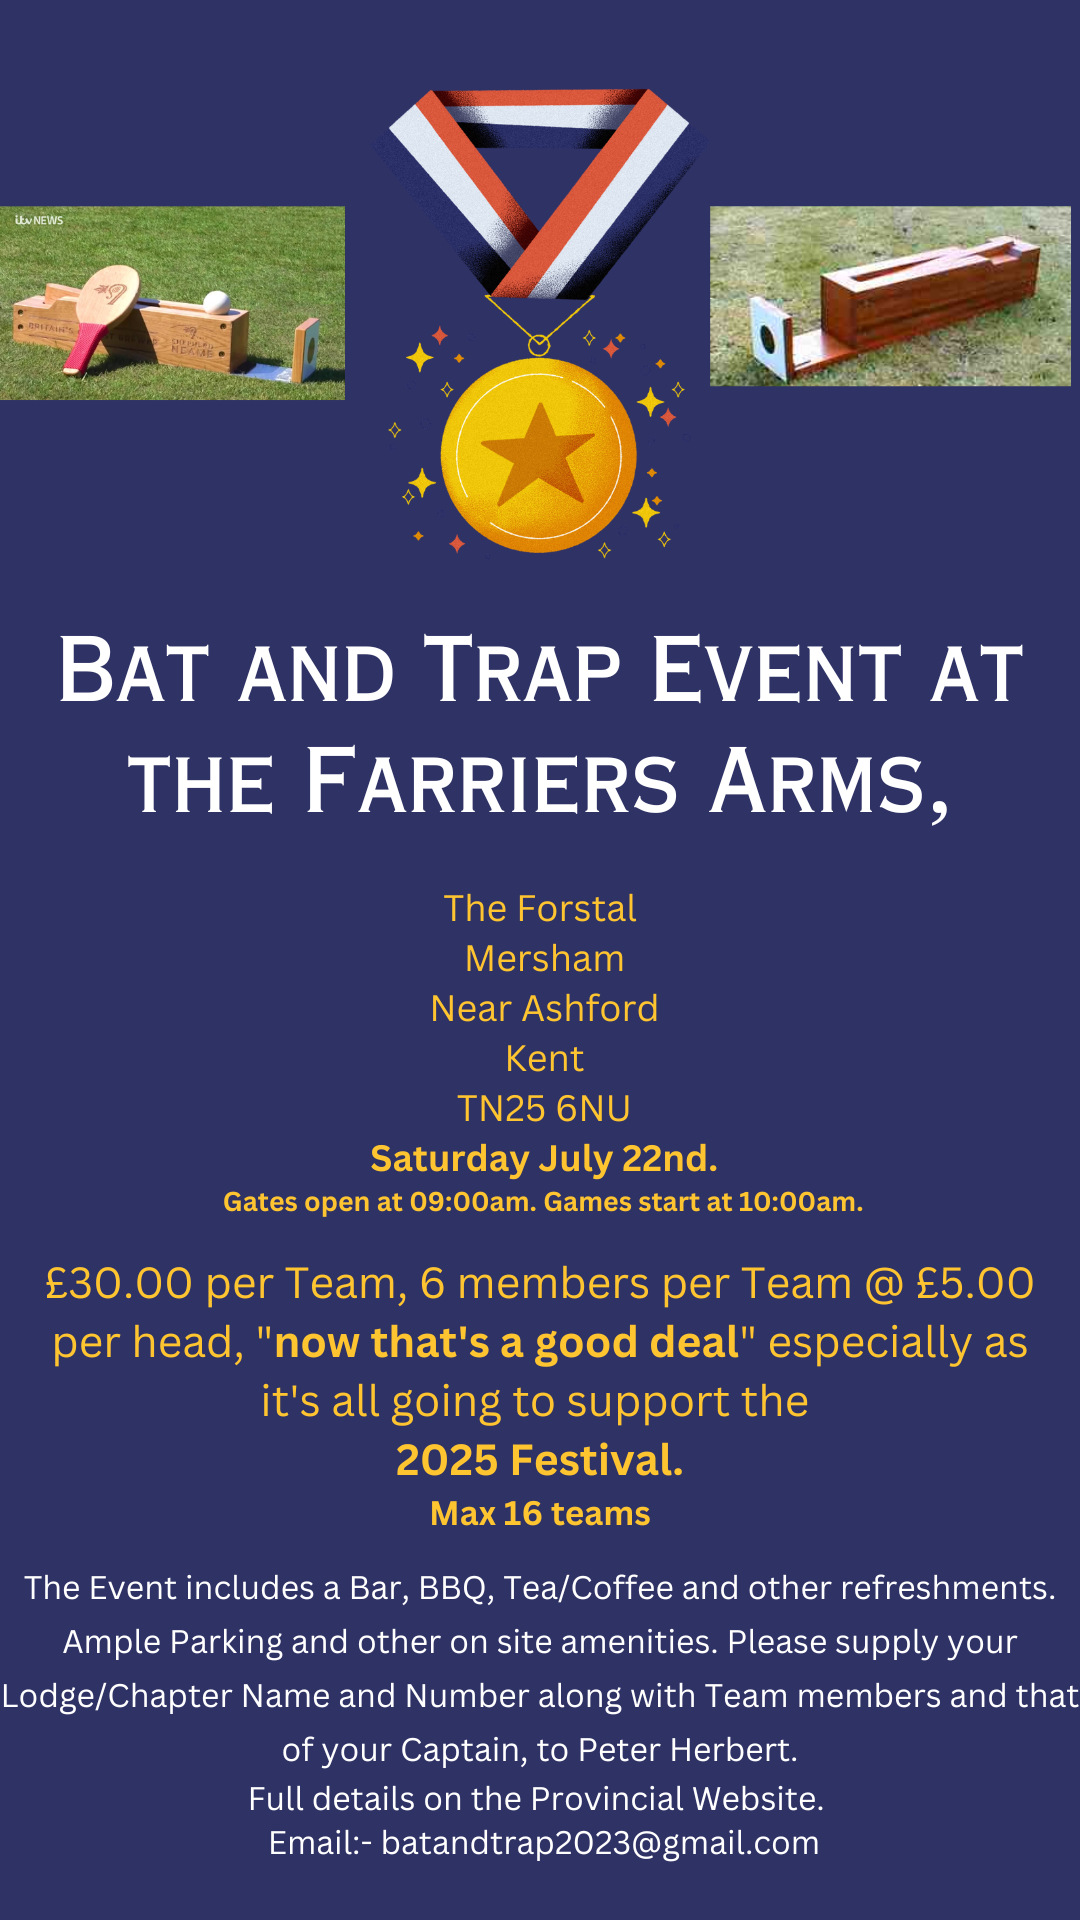 Poster advertising a bat and trap competition on Saturday 22nd July at 09:00